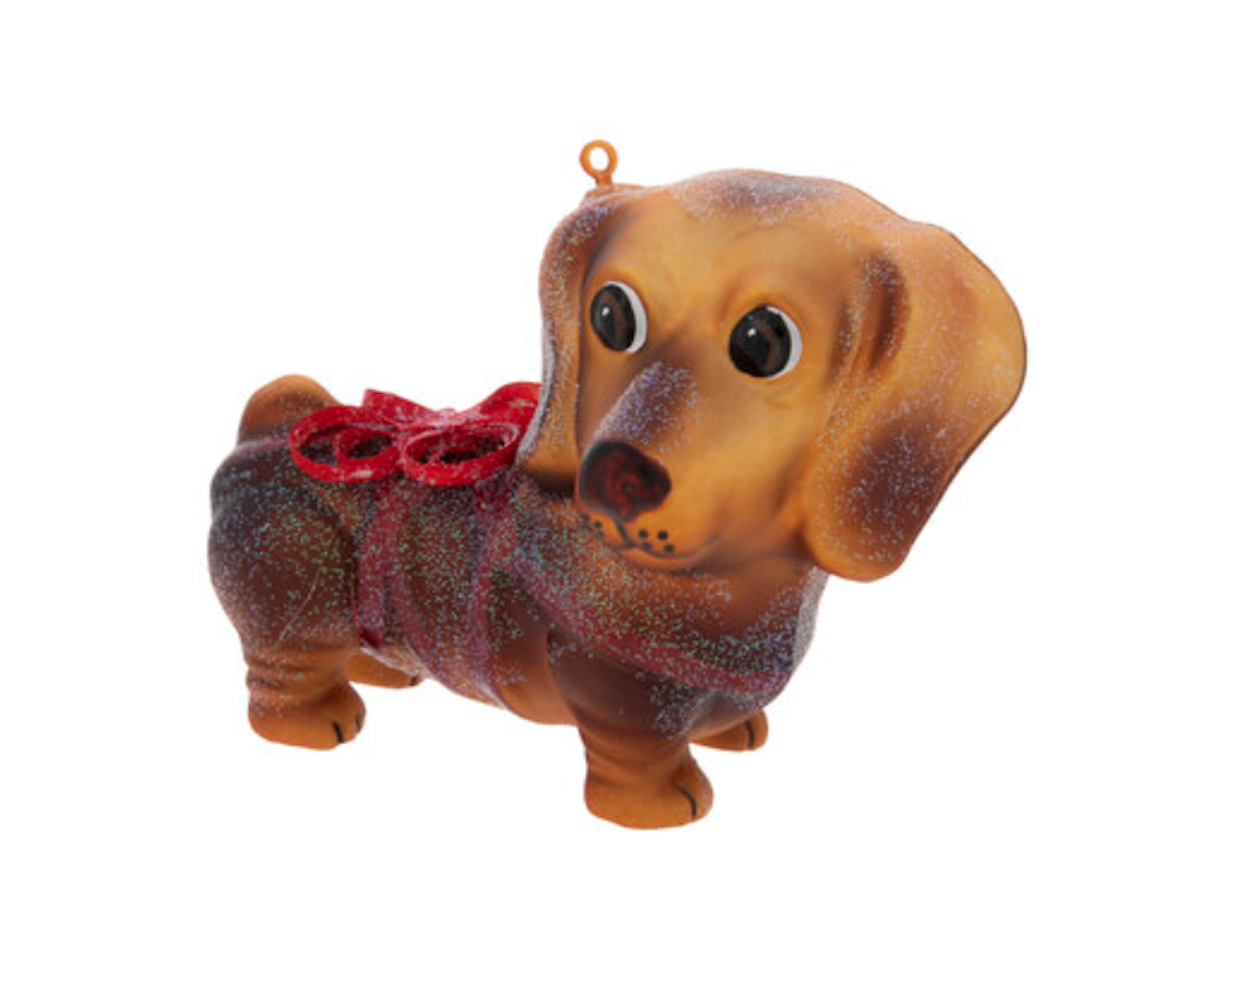 Robert Stanley 2021 Glitter Dachshund Dog Glass Christmas Ornament New with Tag